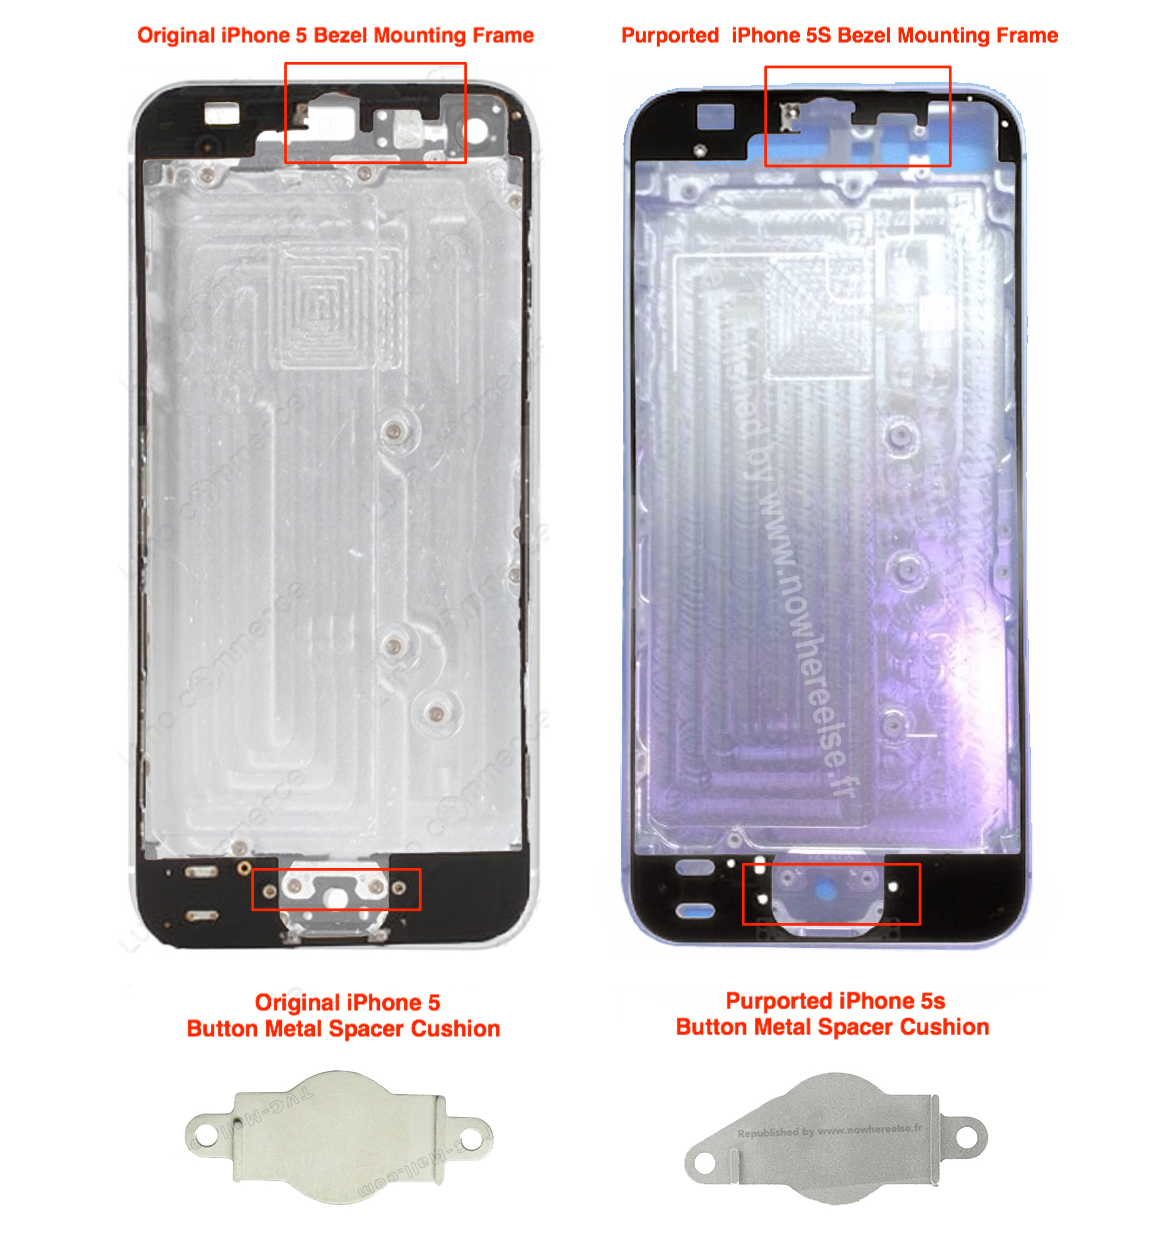 Leaked iPhone 5S Back Panel Suggests Changes to Camera, Home Button? [Photos]